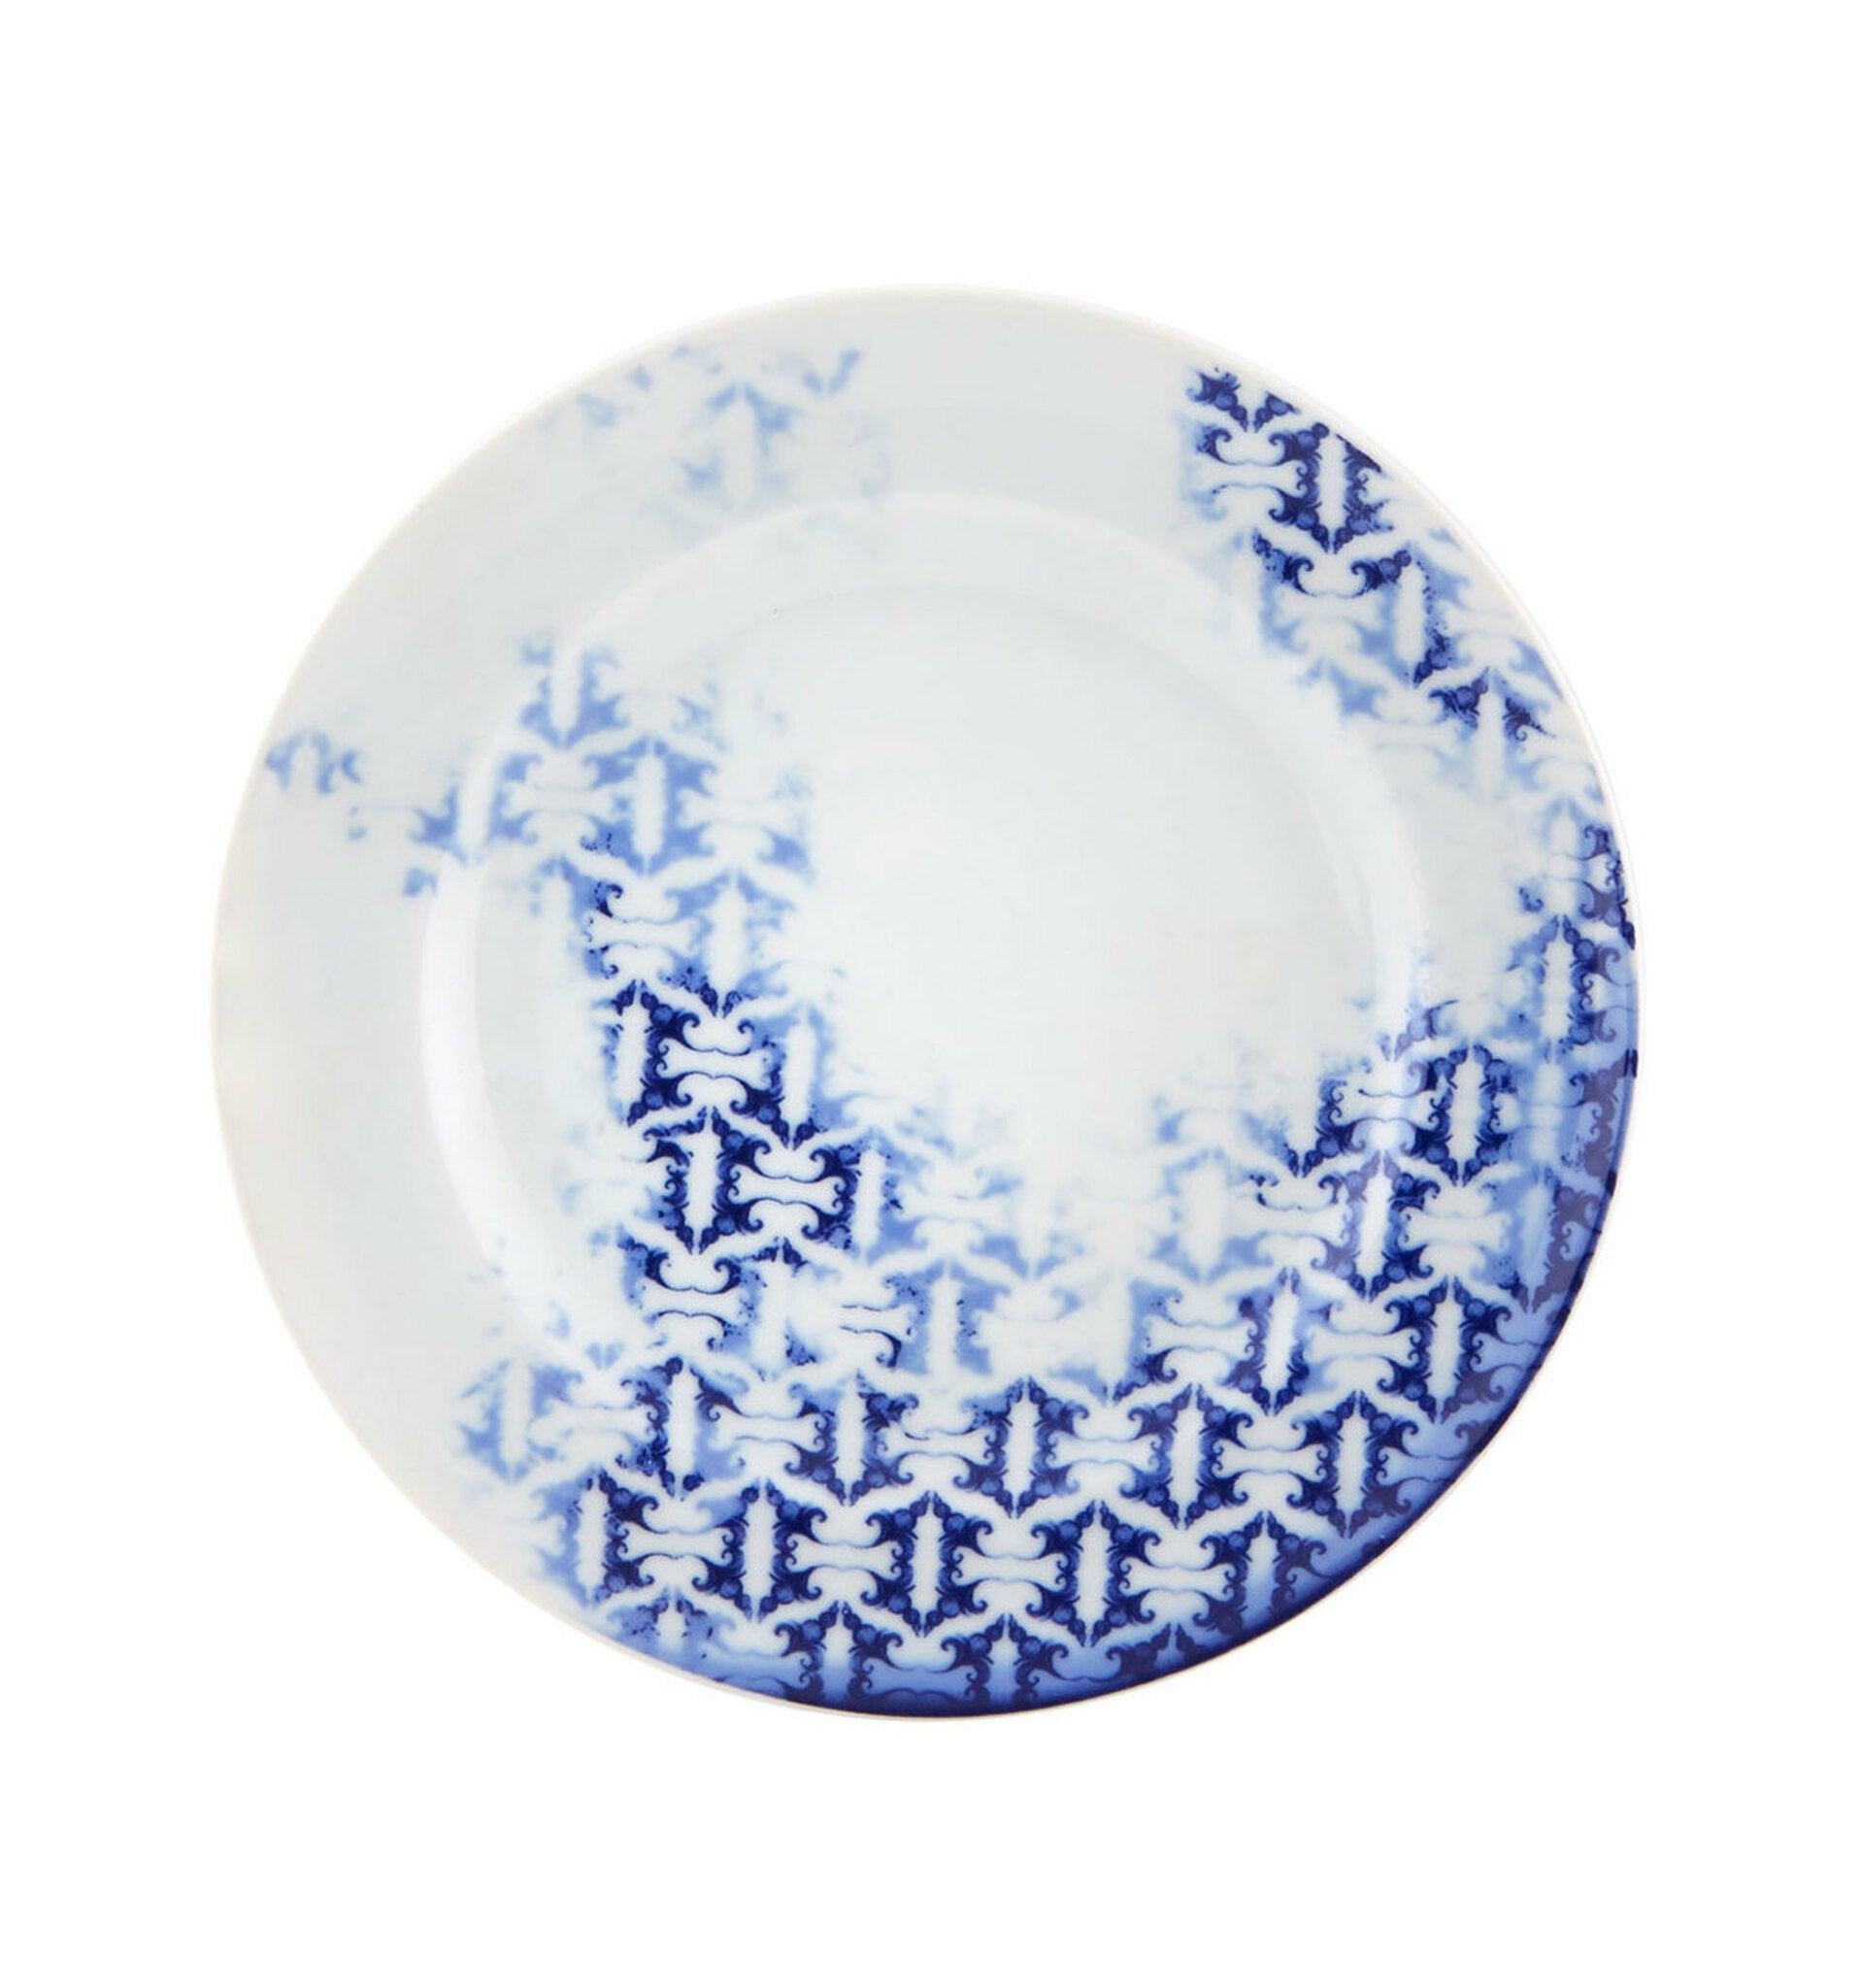 Timeless - Bread and Butter Plate (4 plates) - LAZADO